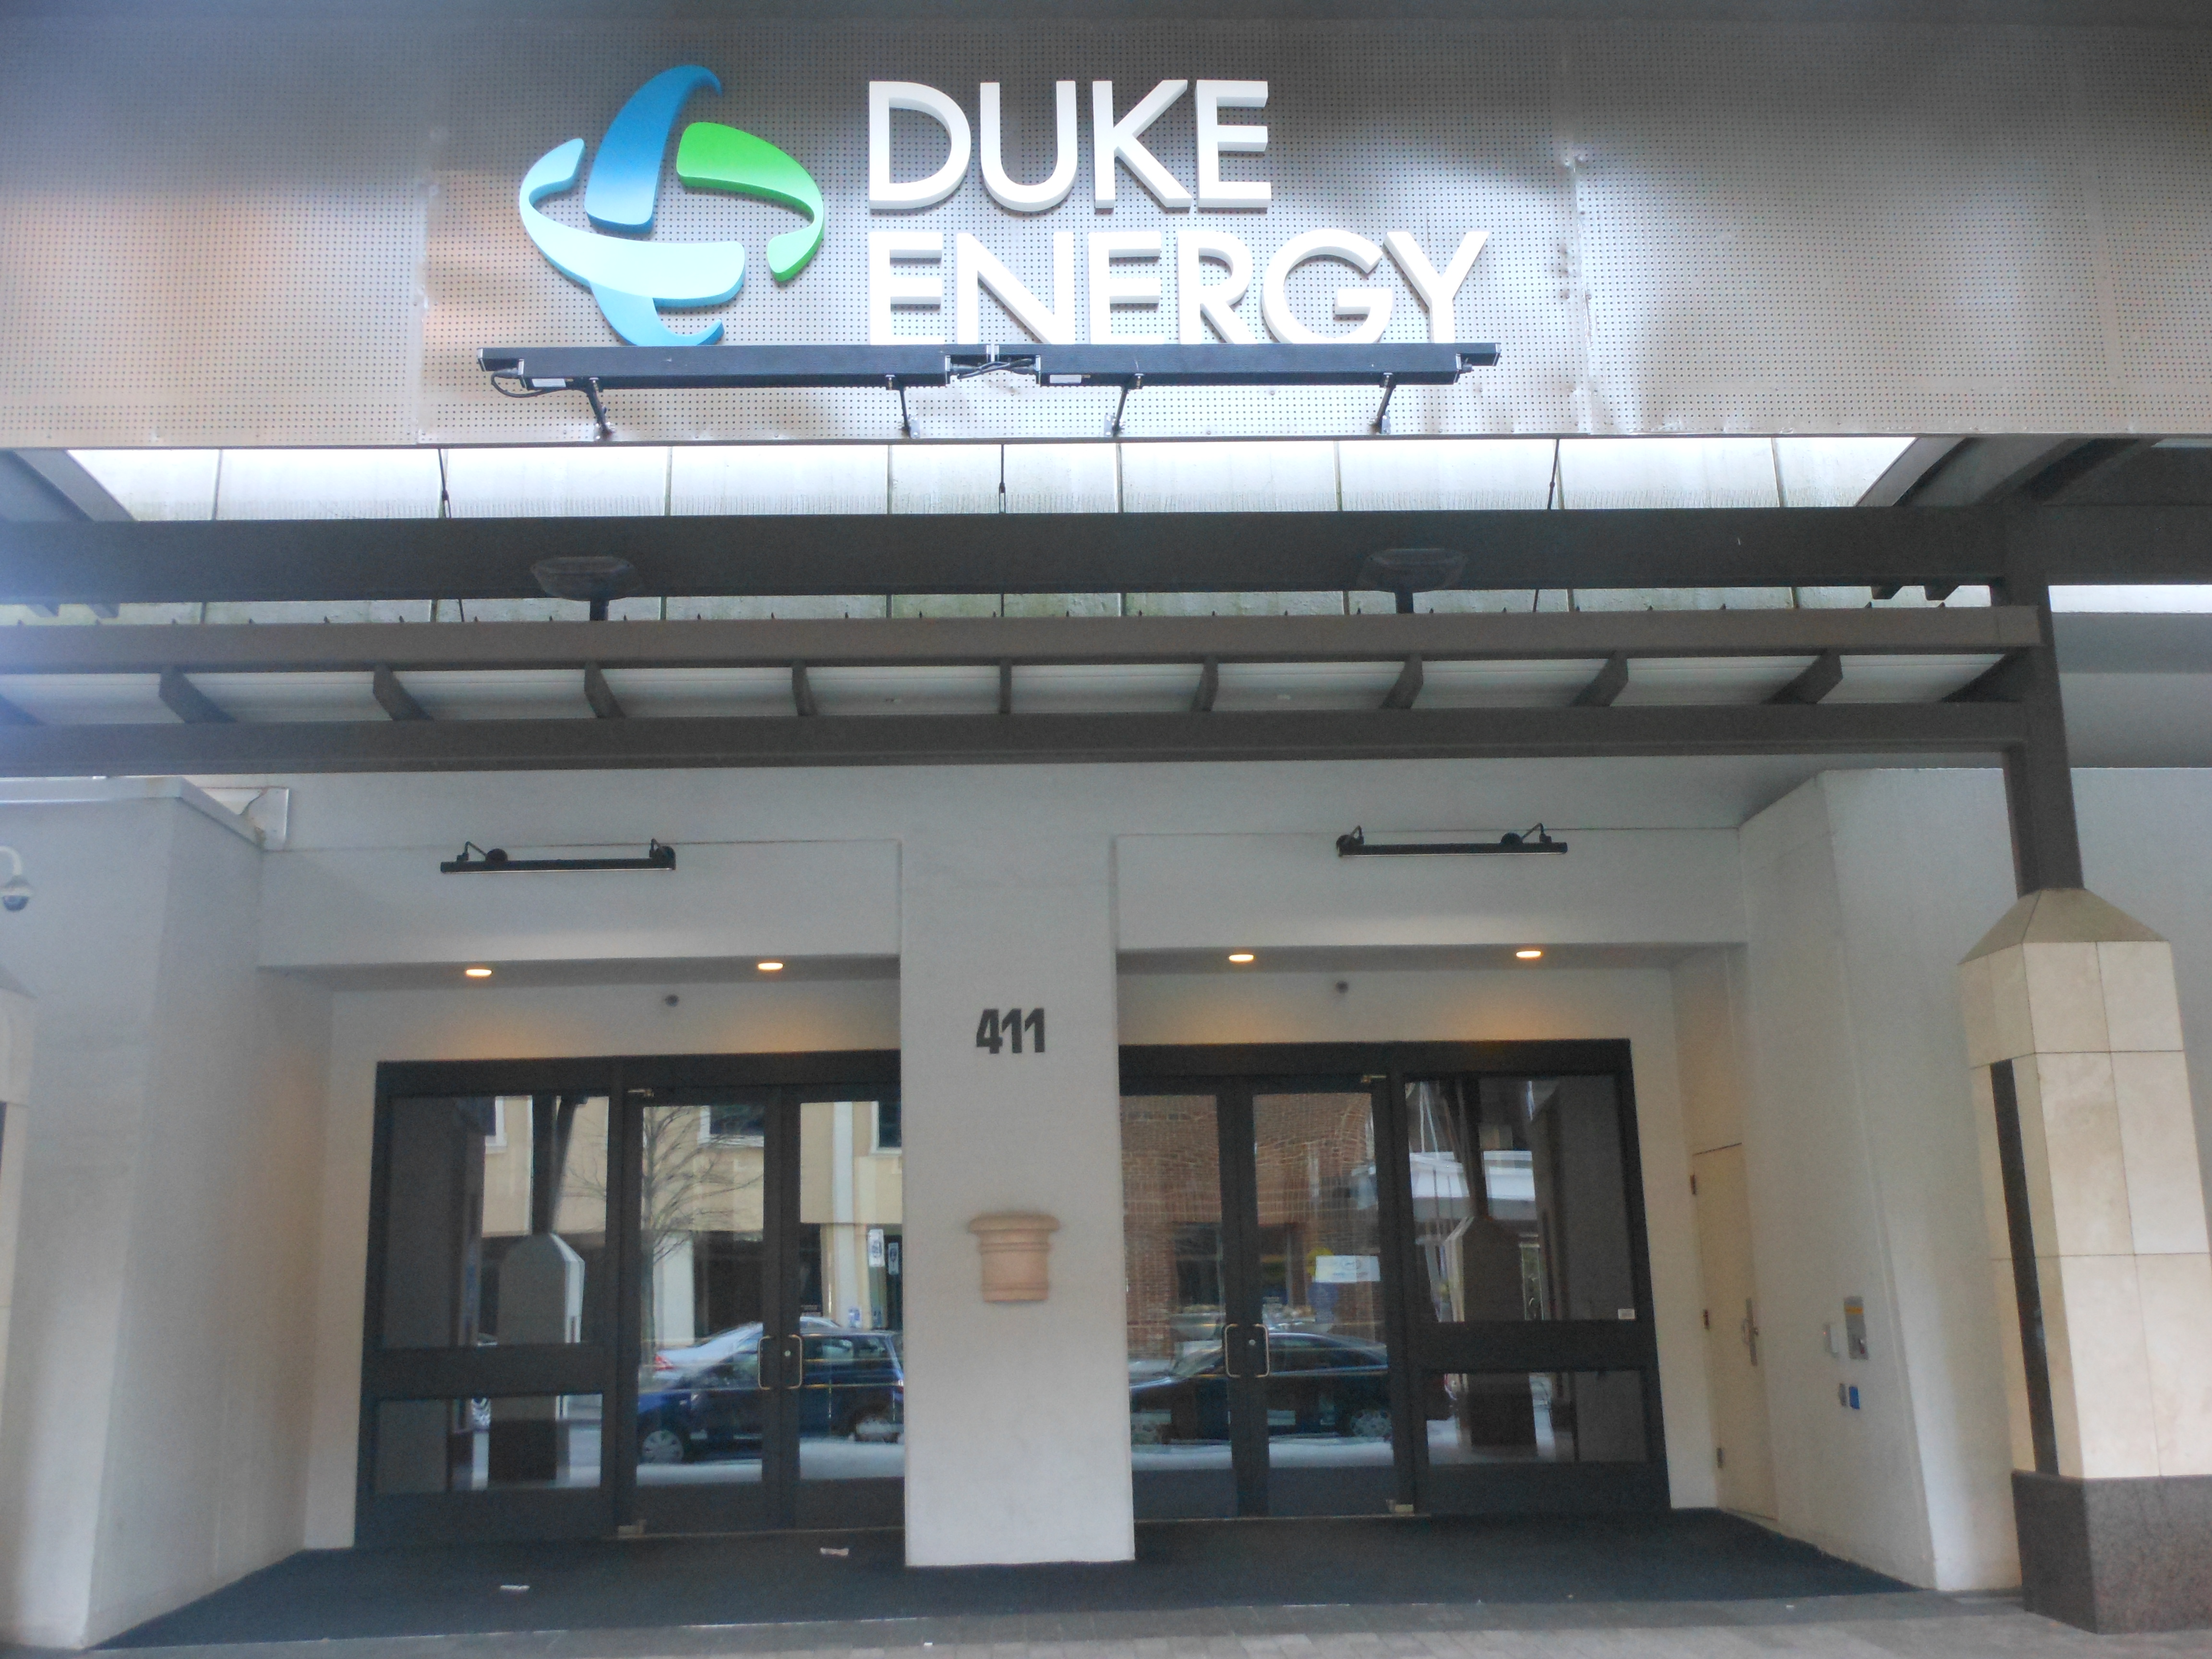 Duke Energy: Achieving Clean Energy Transition & Environmental Goals by 2050